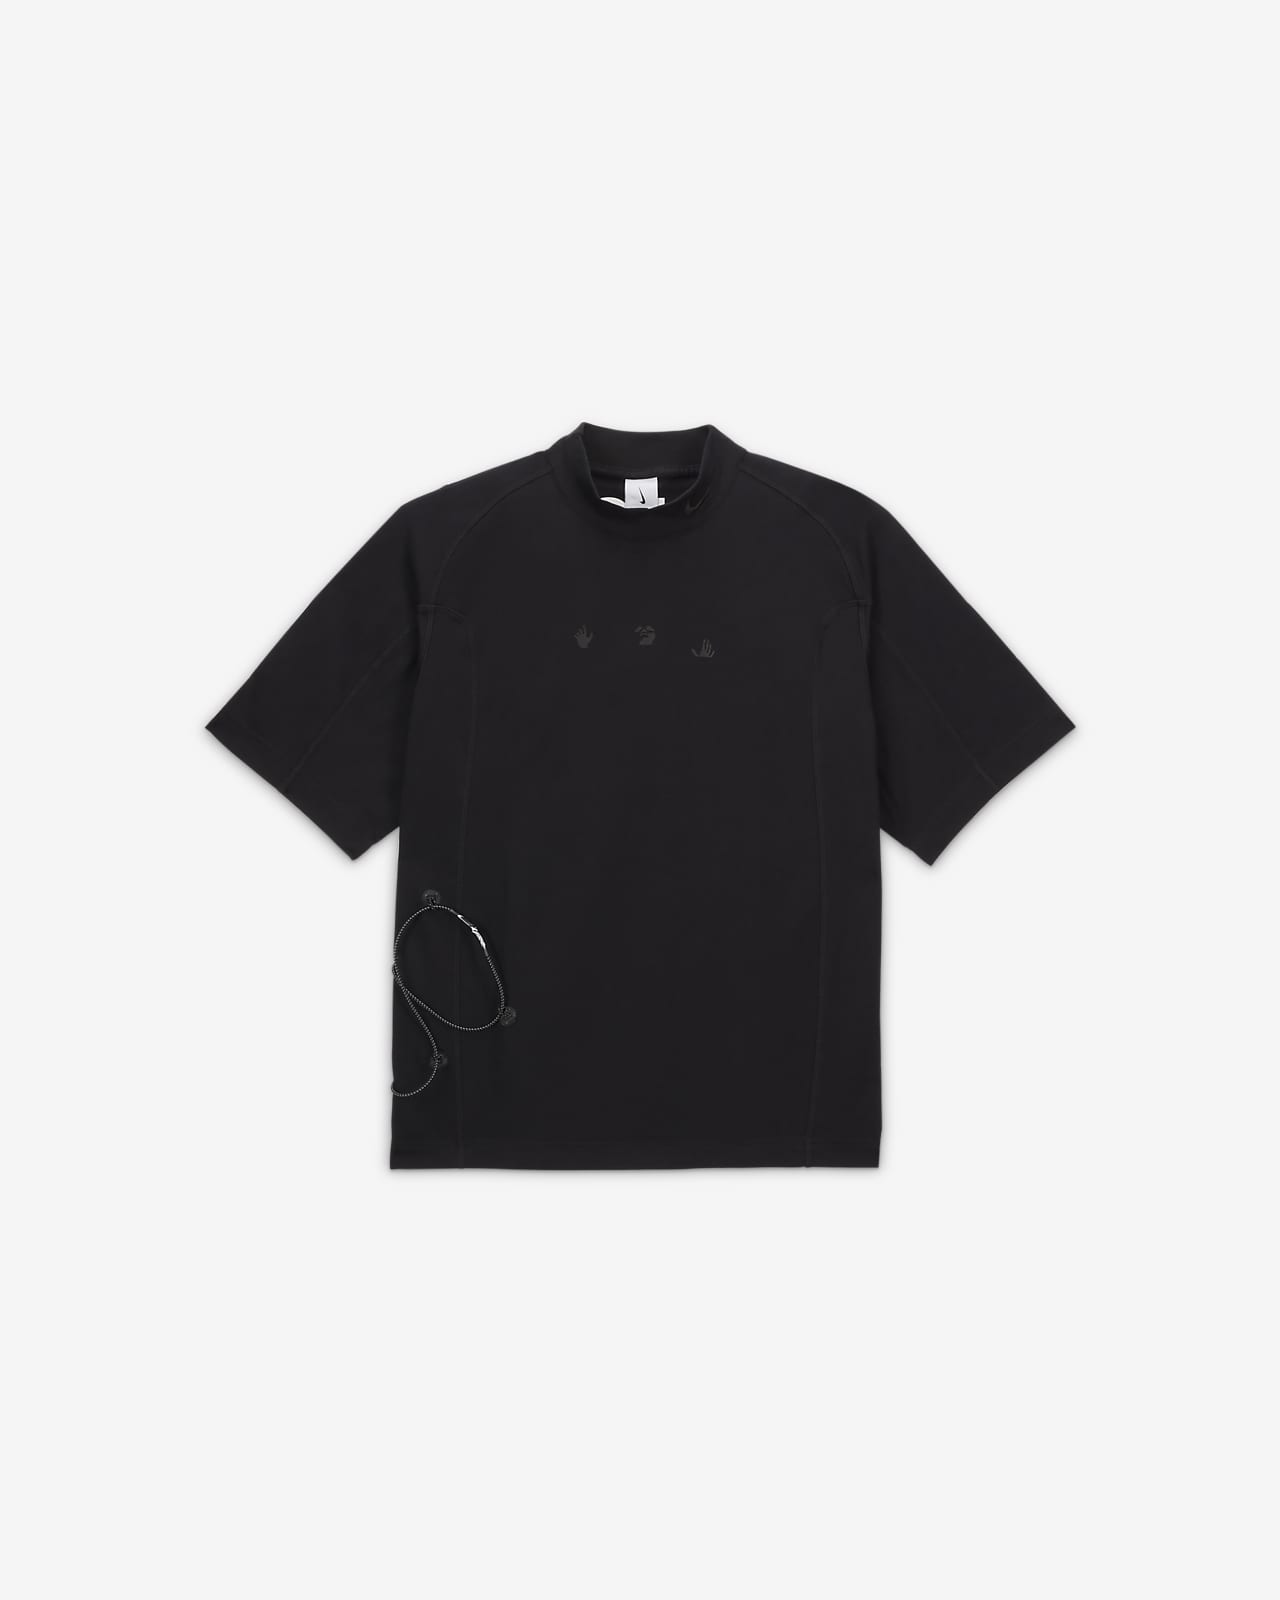 Nike x Off-White™ Short-Sleeve Top